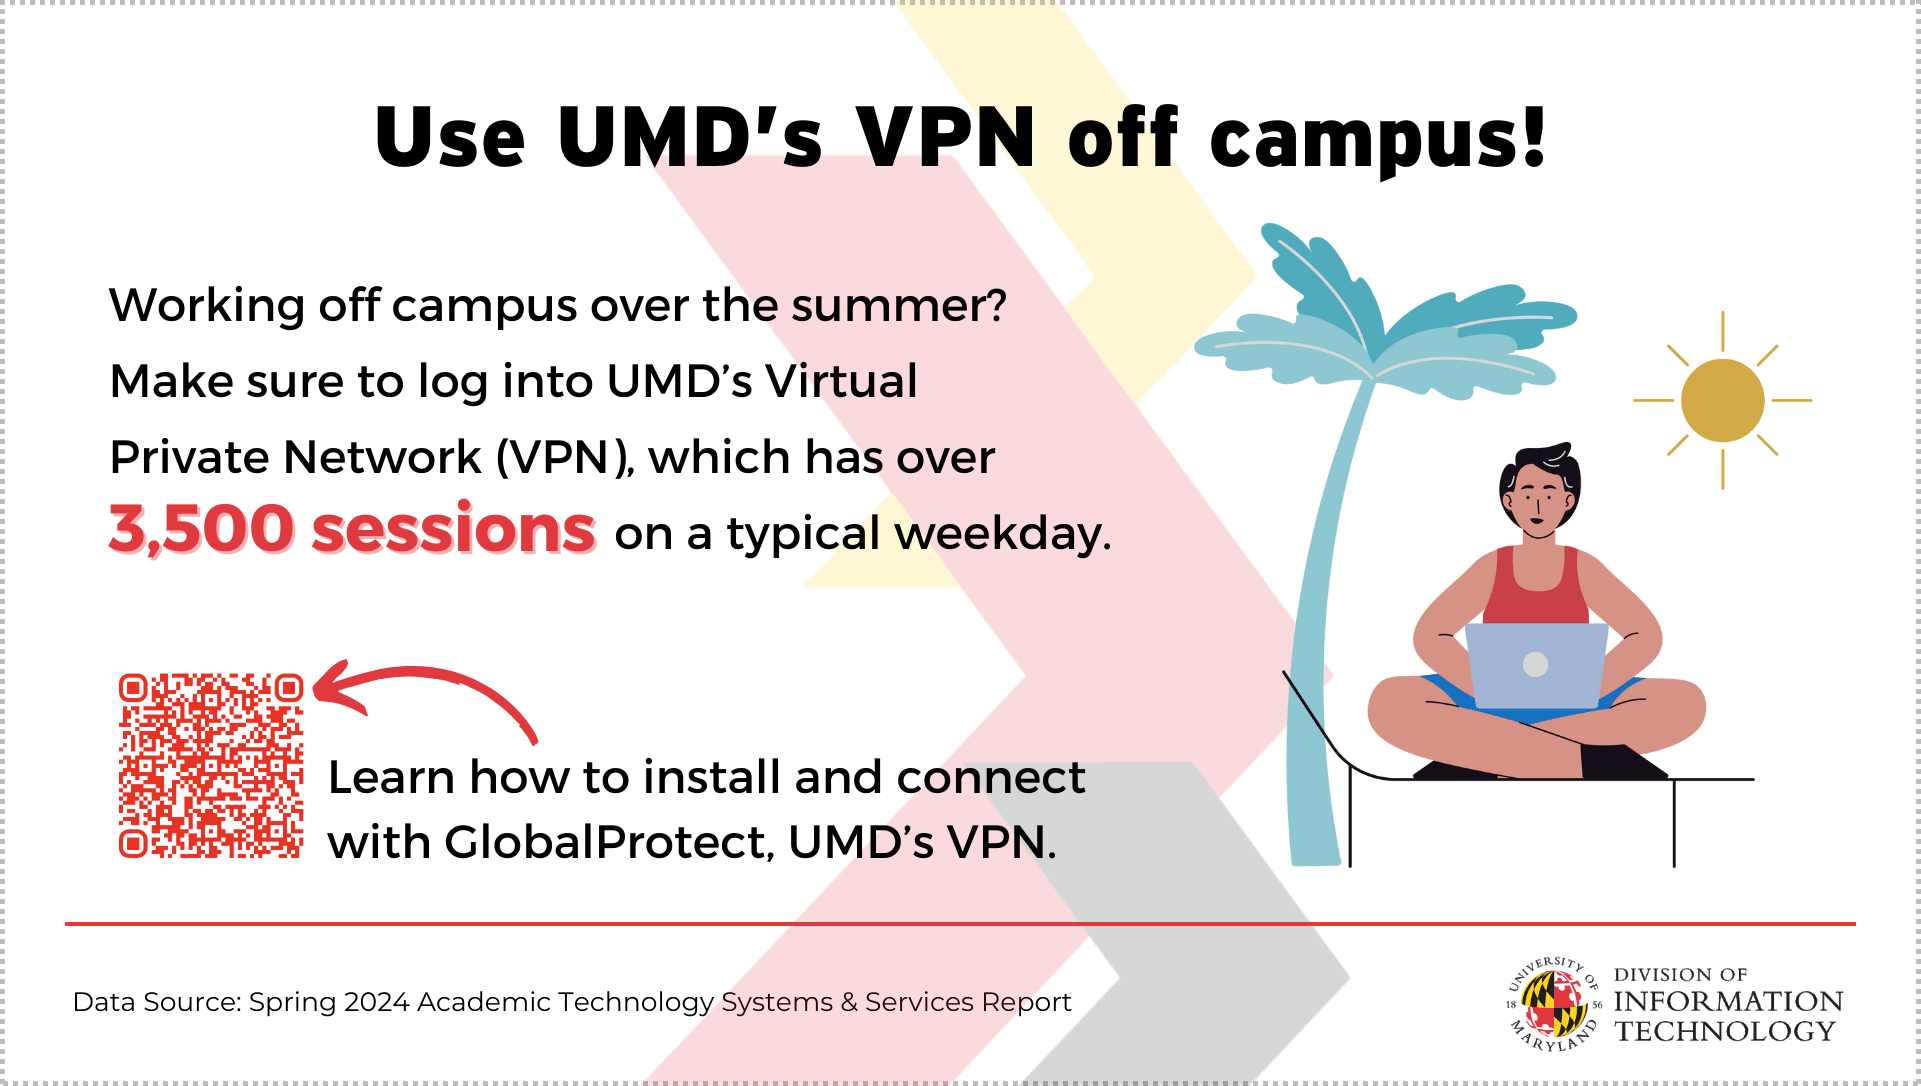 Use UMD's VPN off campus! Working off campus over the summer? Make sure to log into UMD's virtual private network (VPN), which has over 3,500 sessions on a typical weekday. Learn how to install and connect with GlobalProtect, UMD's VPN at https://itsupport.umd.edu/itsupport?id=kb_article_view&sysparm_article=KB0016076